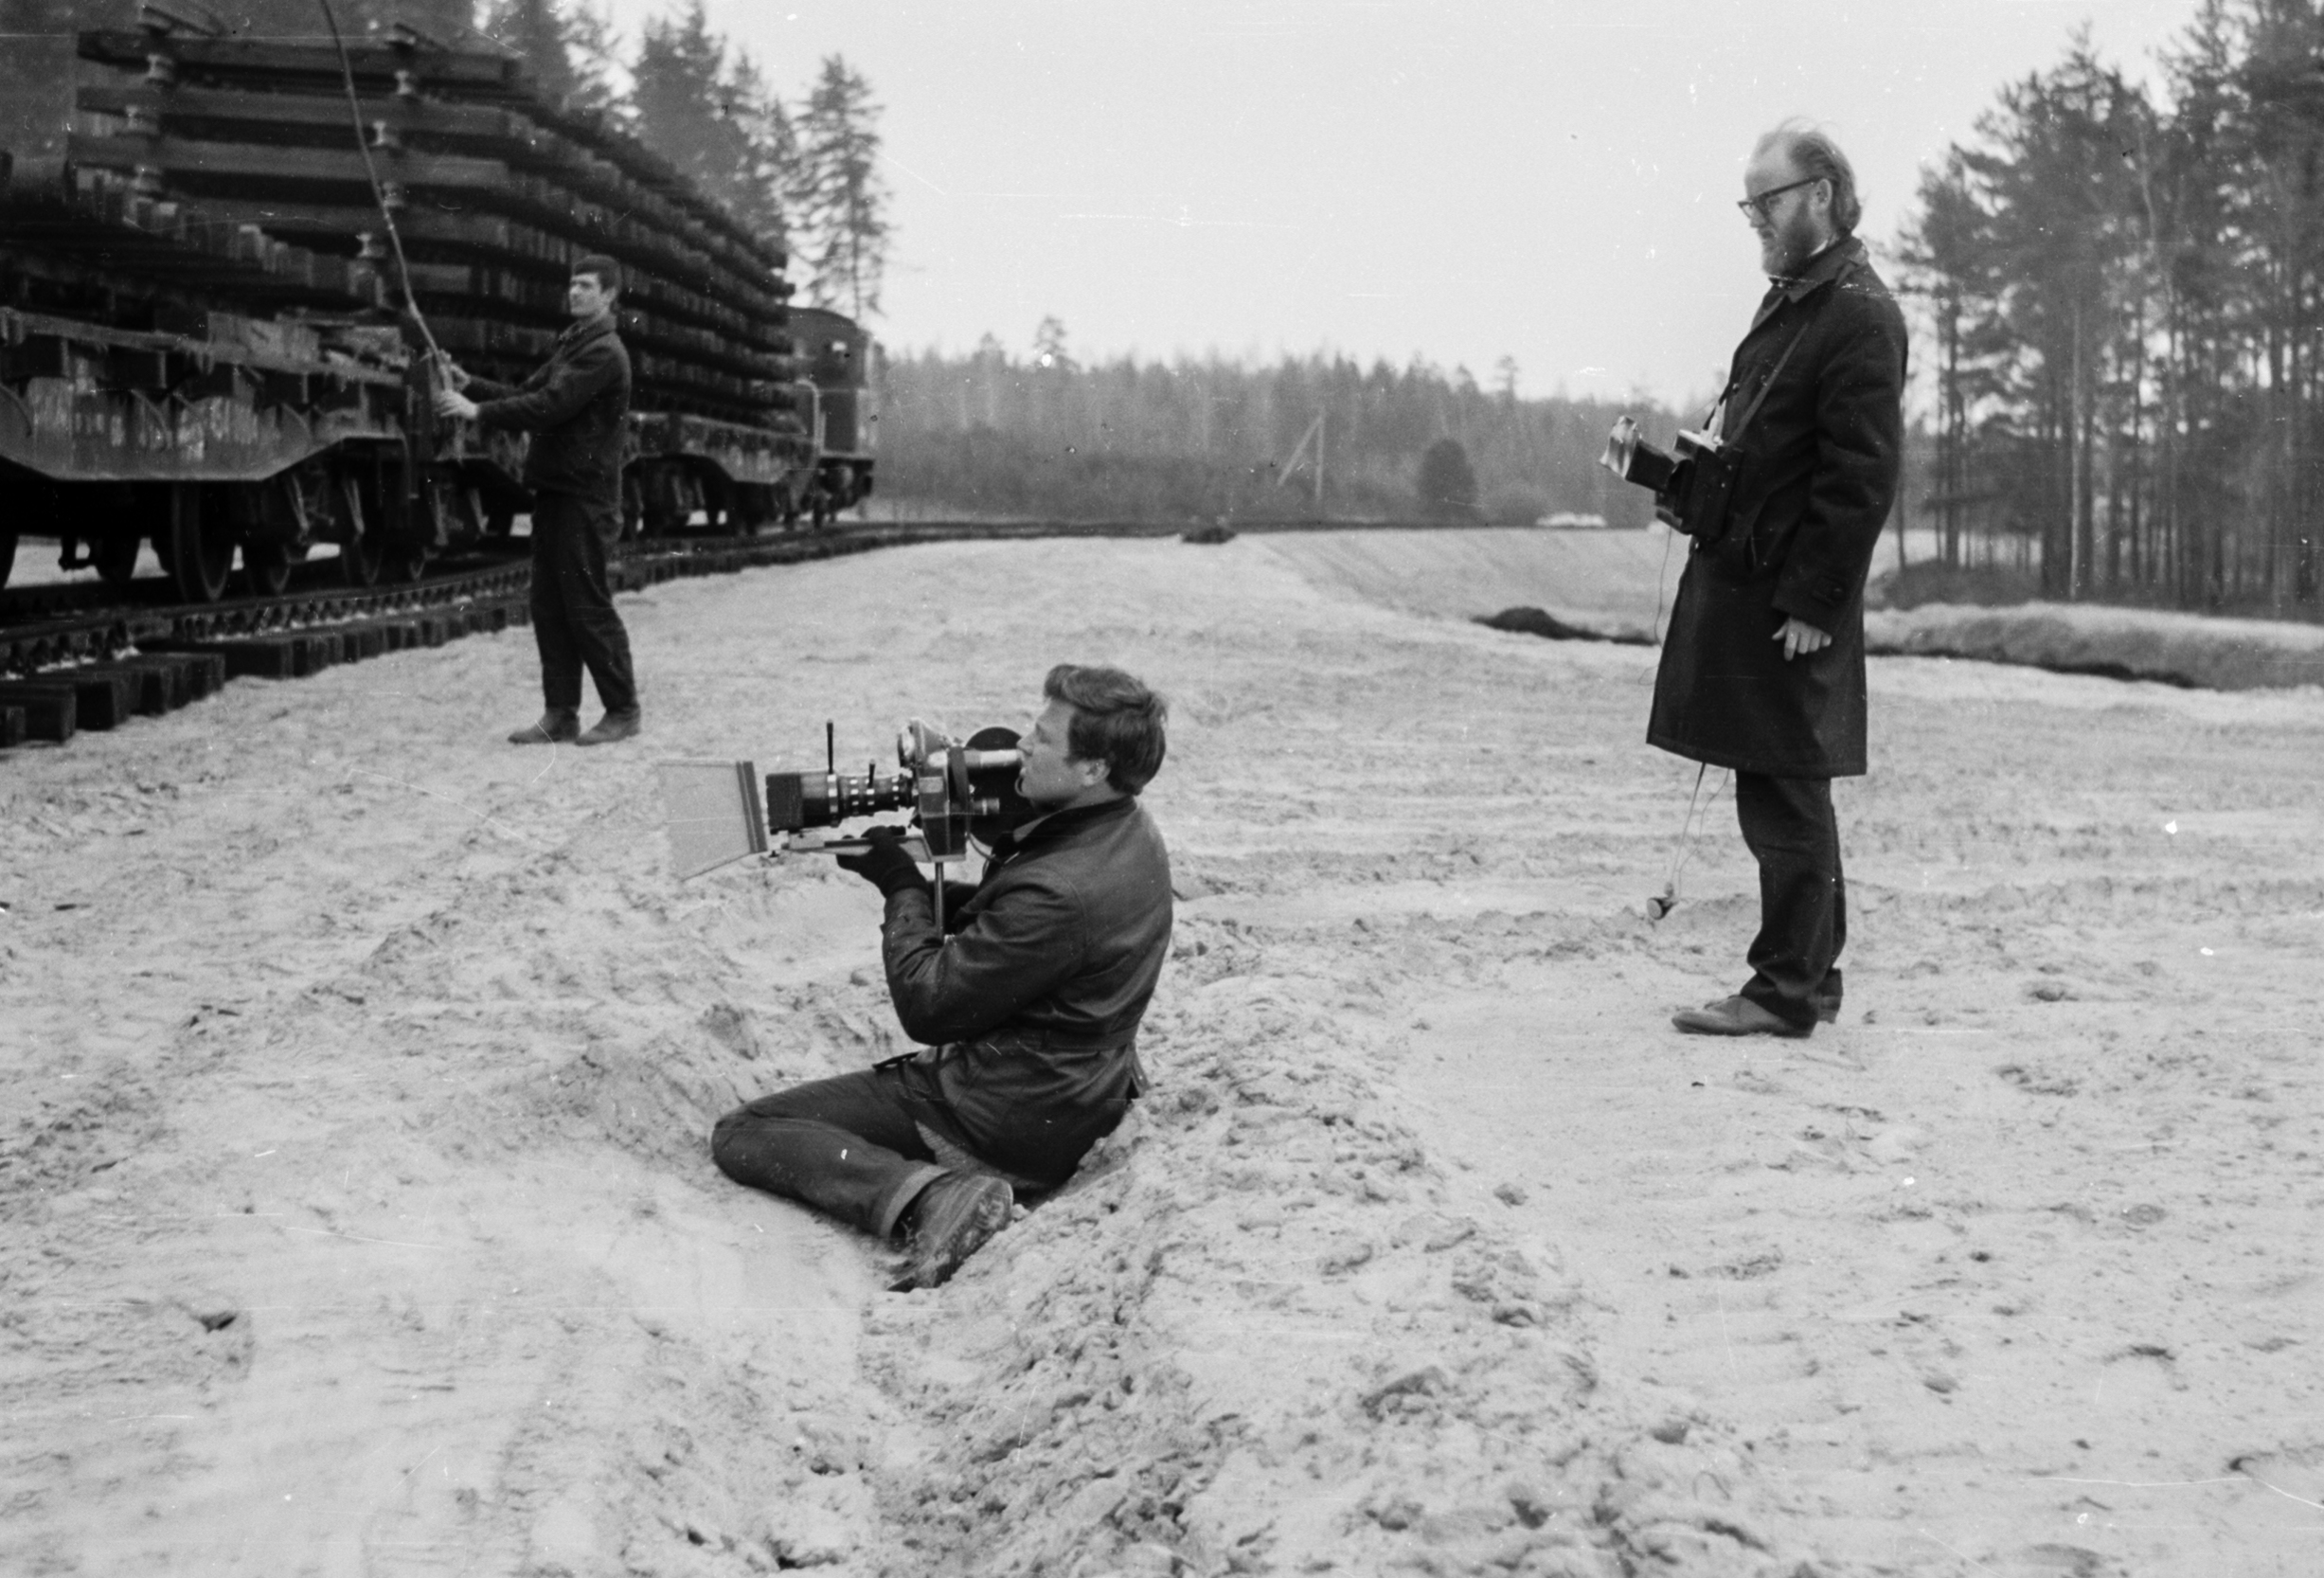 Filming the construction of the new railway